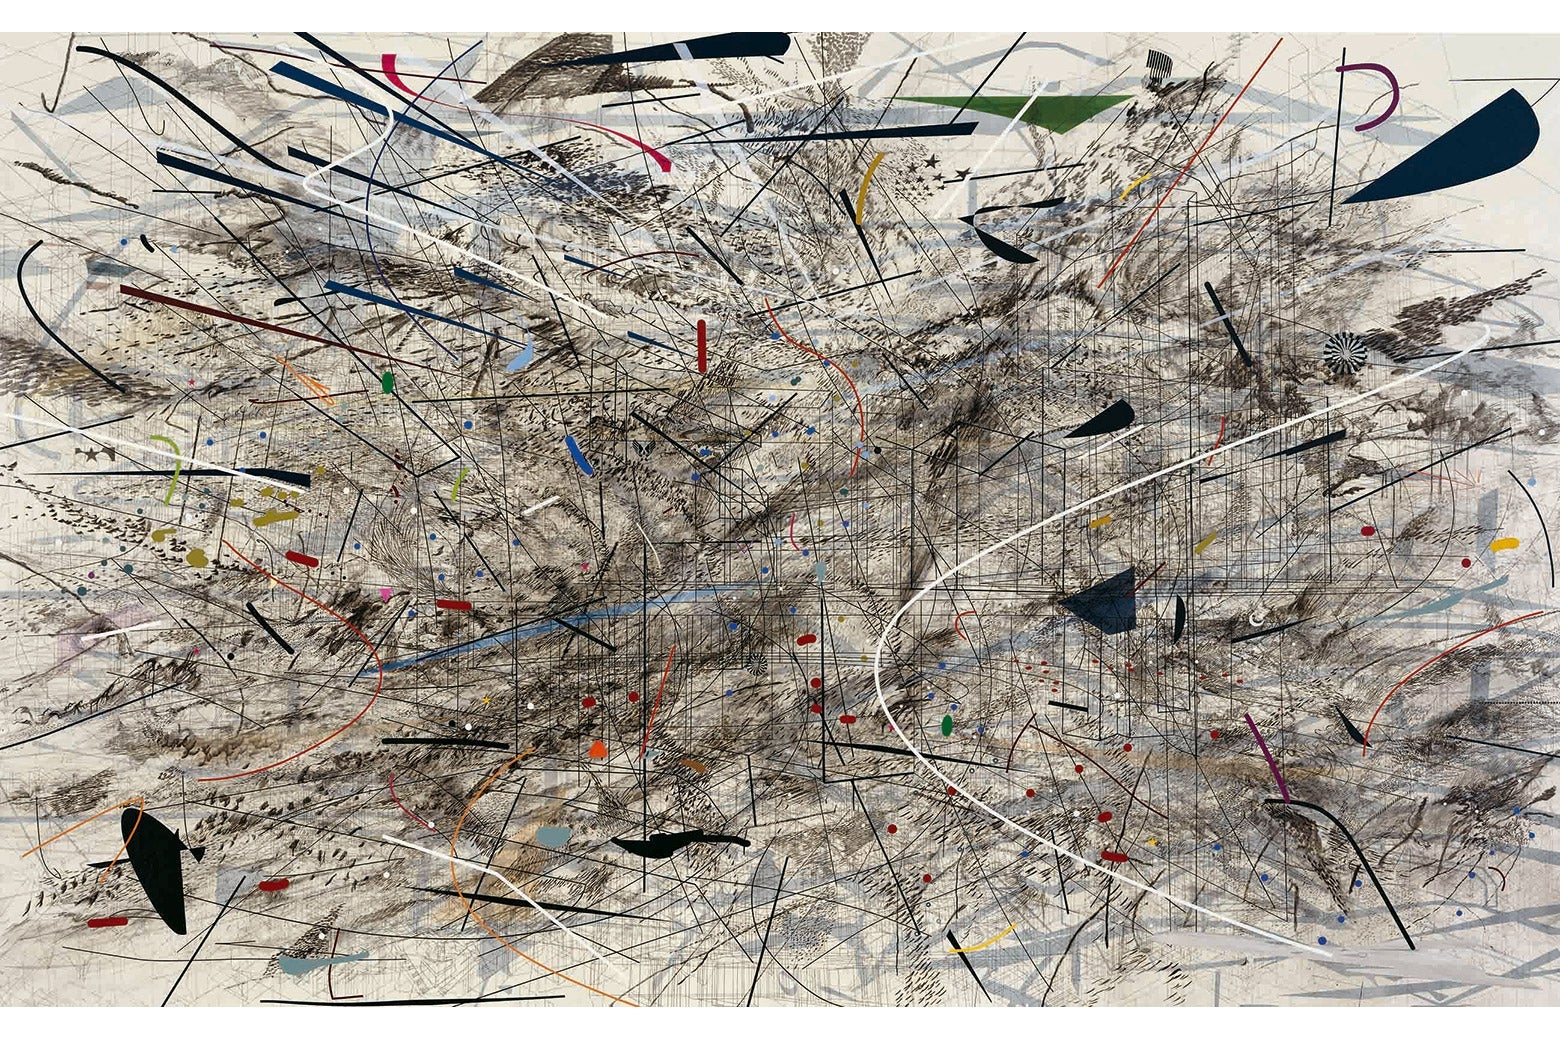 Julie Mehretu, Black City, 2007. Ink and acrylic on canvas, 120 x 192 inches (304.8 x 487.7 cm). 